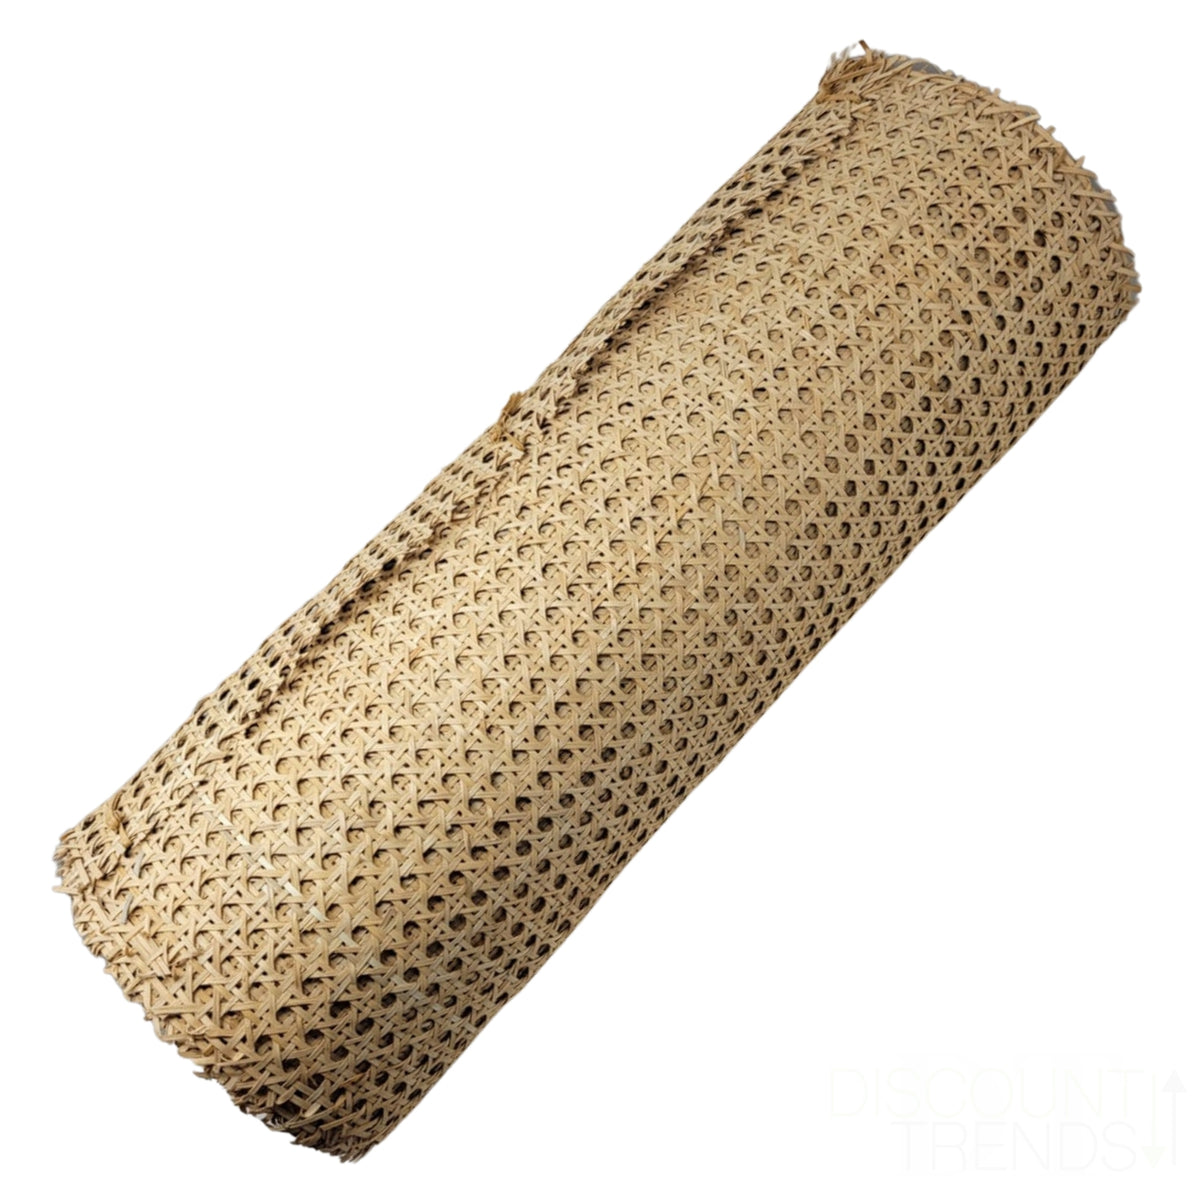 24 Wide Semi-Bleached Rattan Webbing Roll for Caning Projects